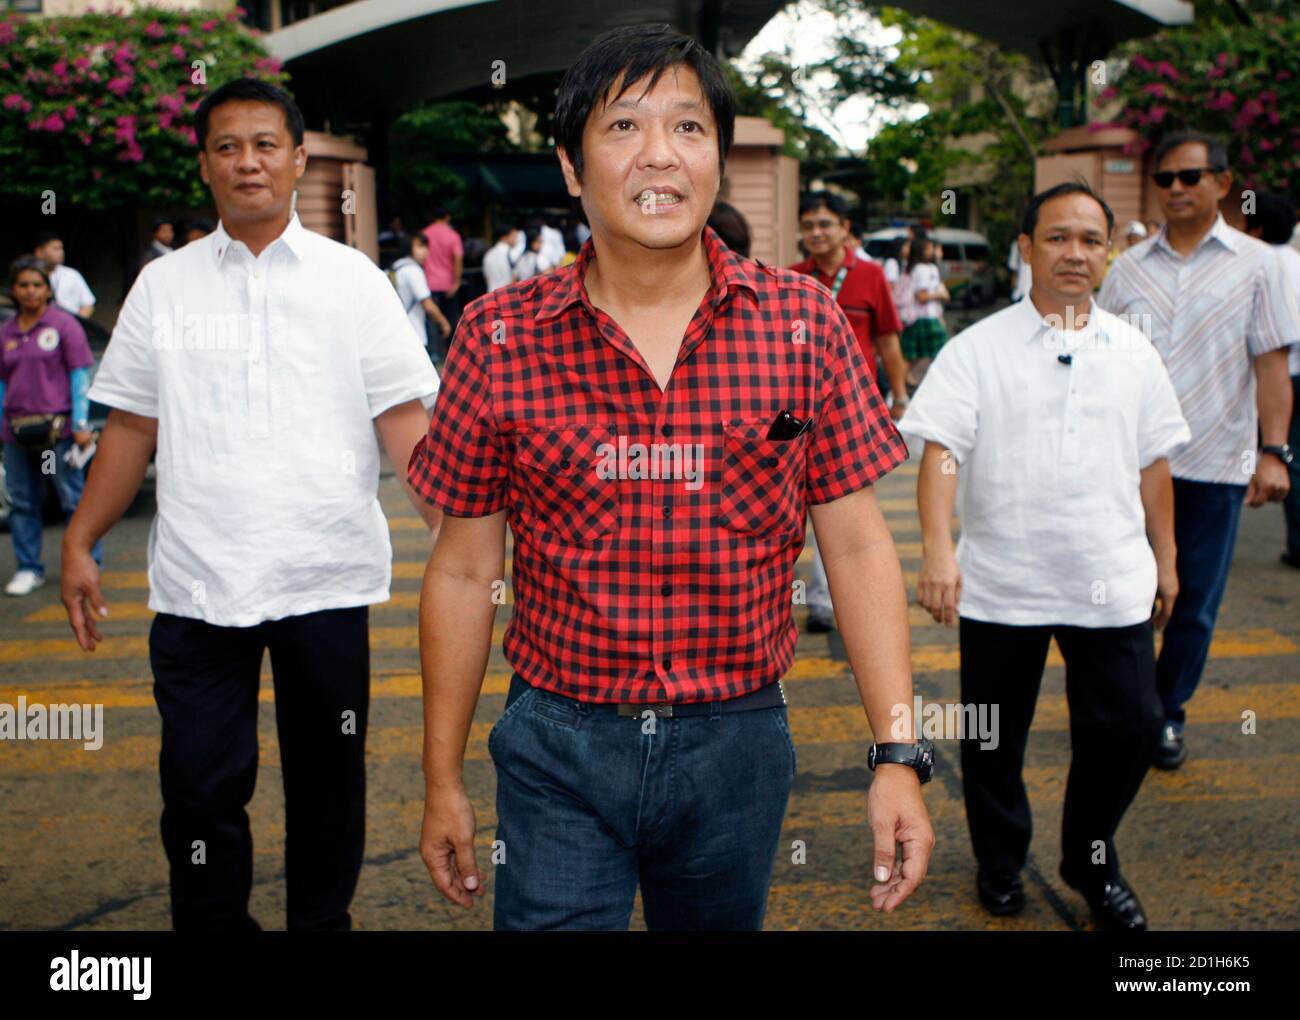 Senatorial Candidate Ferdinand Bongbong Marcos Jr C The Only Son Of Late Dictator Ferdinand E Marcos Walks With Bodyguards During A Campaign In Manila March 18 2010 The Oxford Educated Son Of The